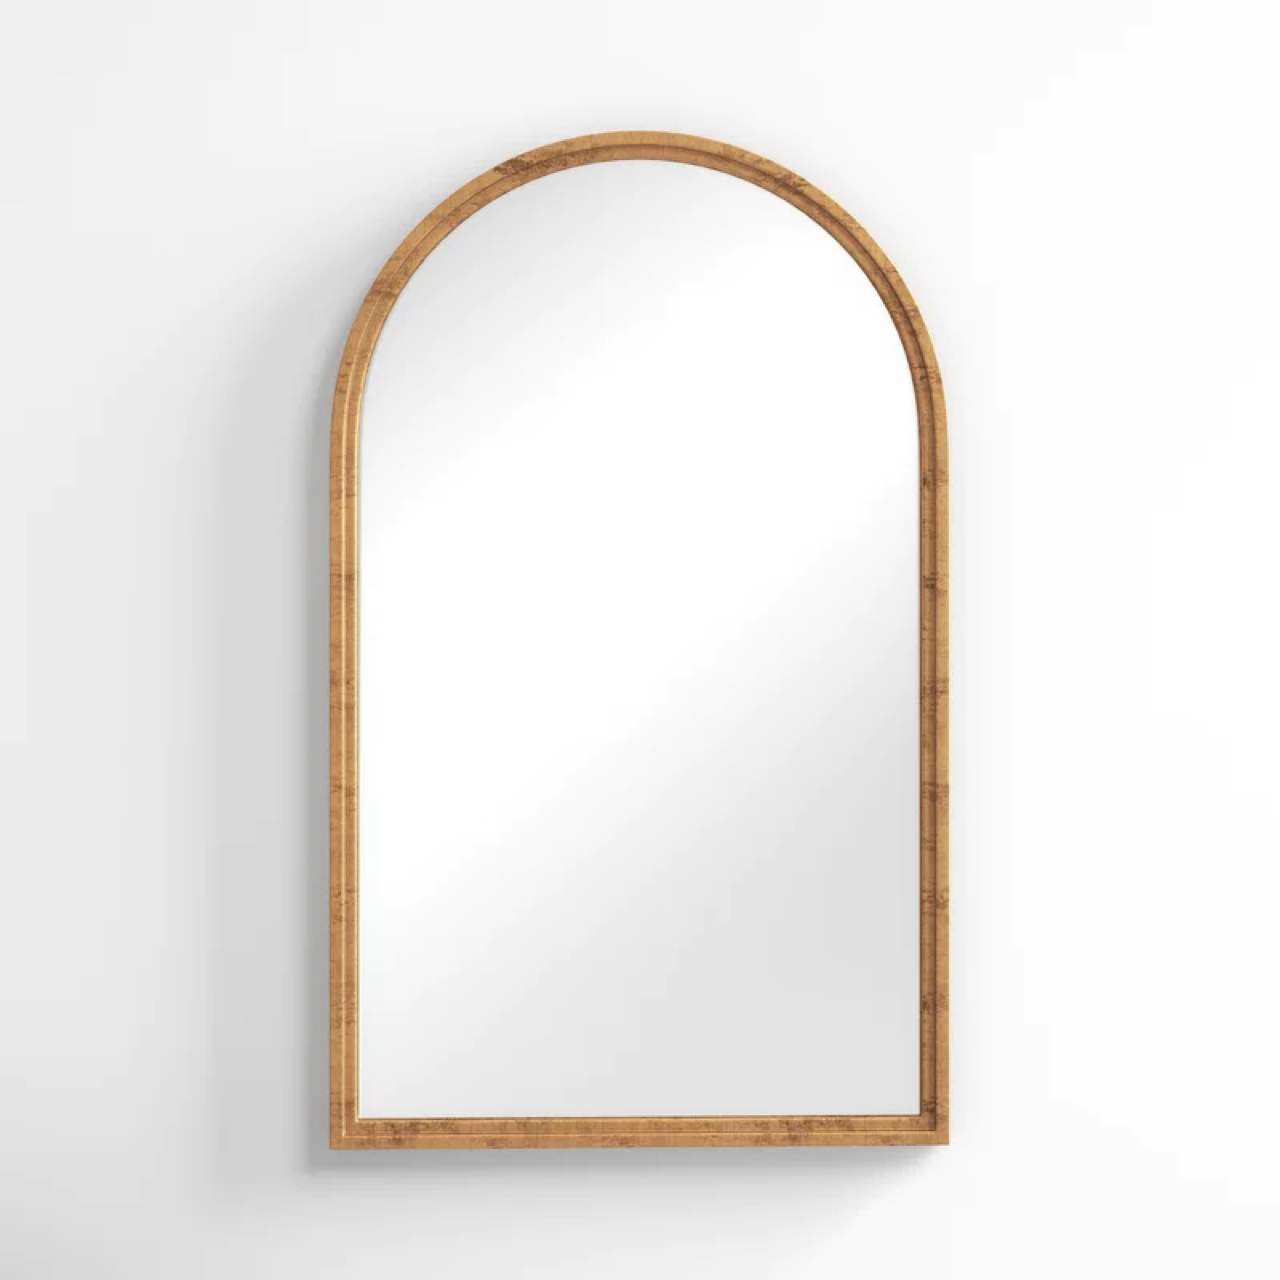 New to Sale: Mirrors